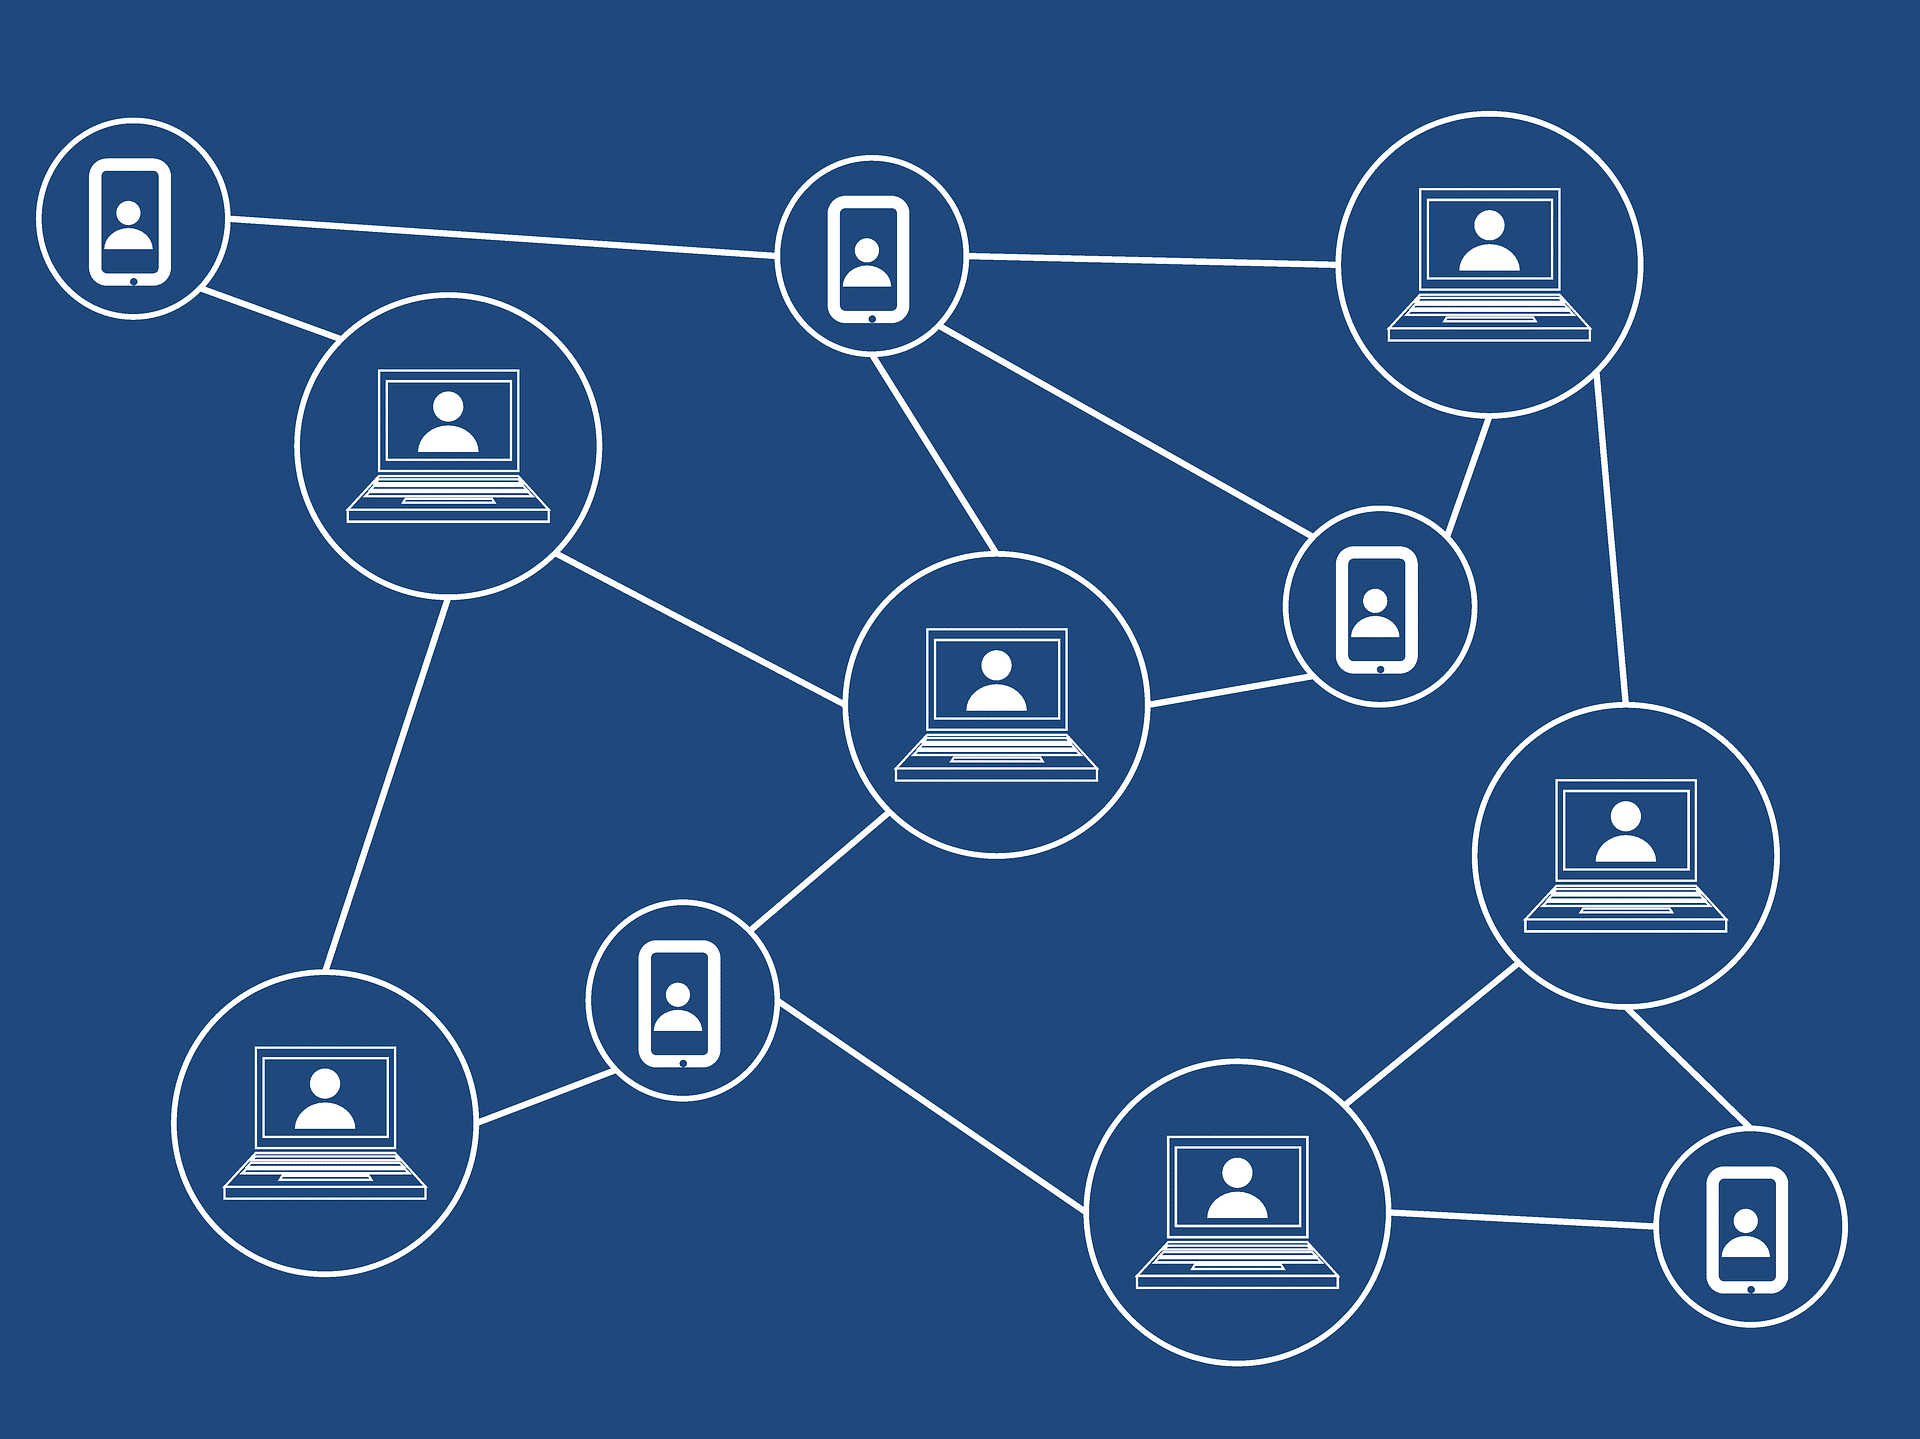 Blockchain marketplace representation: a graphic showing computers and phones connected by lines, symbolizing the directness of a blockchain approach.